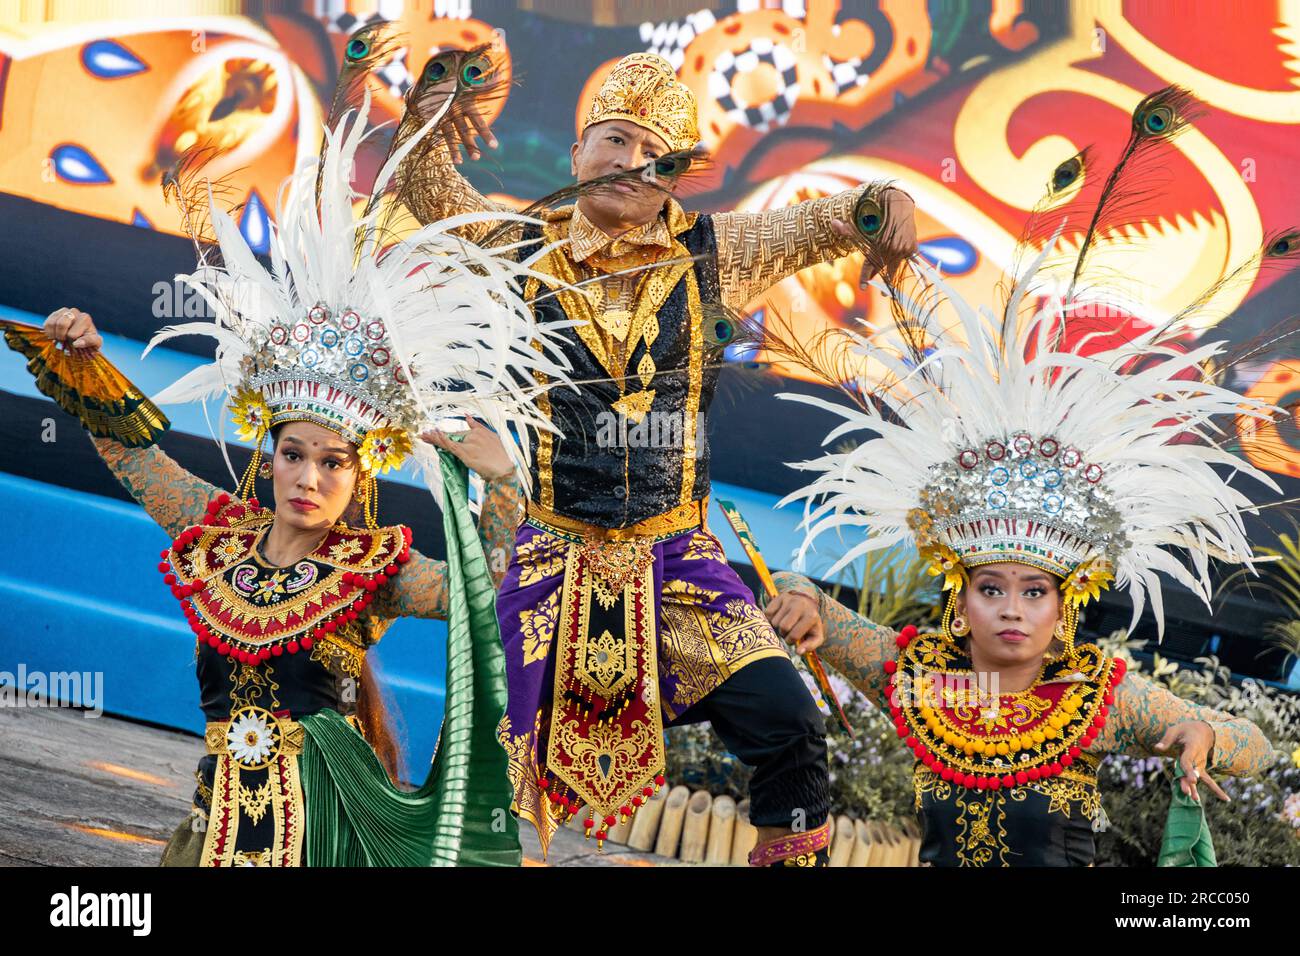 Denpasar, Indonesia. 10th July, 2023. Traditional Balinese dancers perform during the opening ceremony for the Pacific Amphibious Leaders Symposium, July 10, 2023 in Denpasar, Bali, Indonesia. The symposium involves military leaders from 24 Indo-Pacific nations. Credit: LCpl. Blake Gonter/U.S. Marine Corps/Alamy Live News Stock Photo